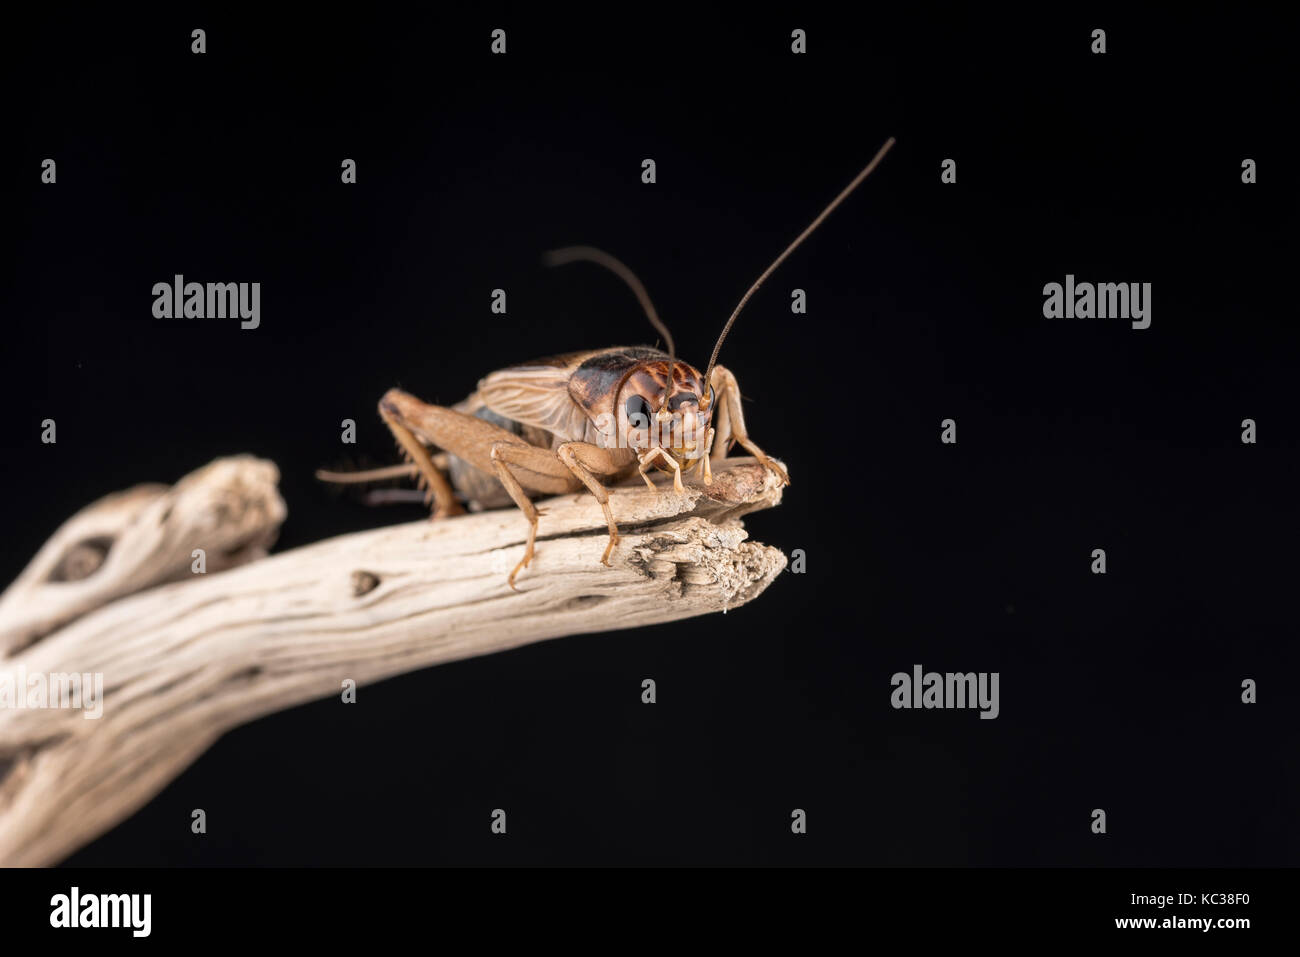 A house cricket perched on the end of a piece of wood, isolated against a black background. Room for copy. Stock Photo